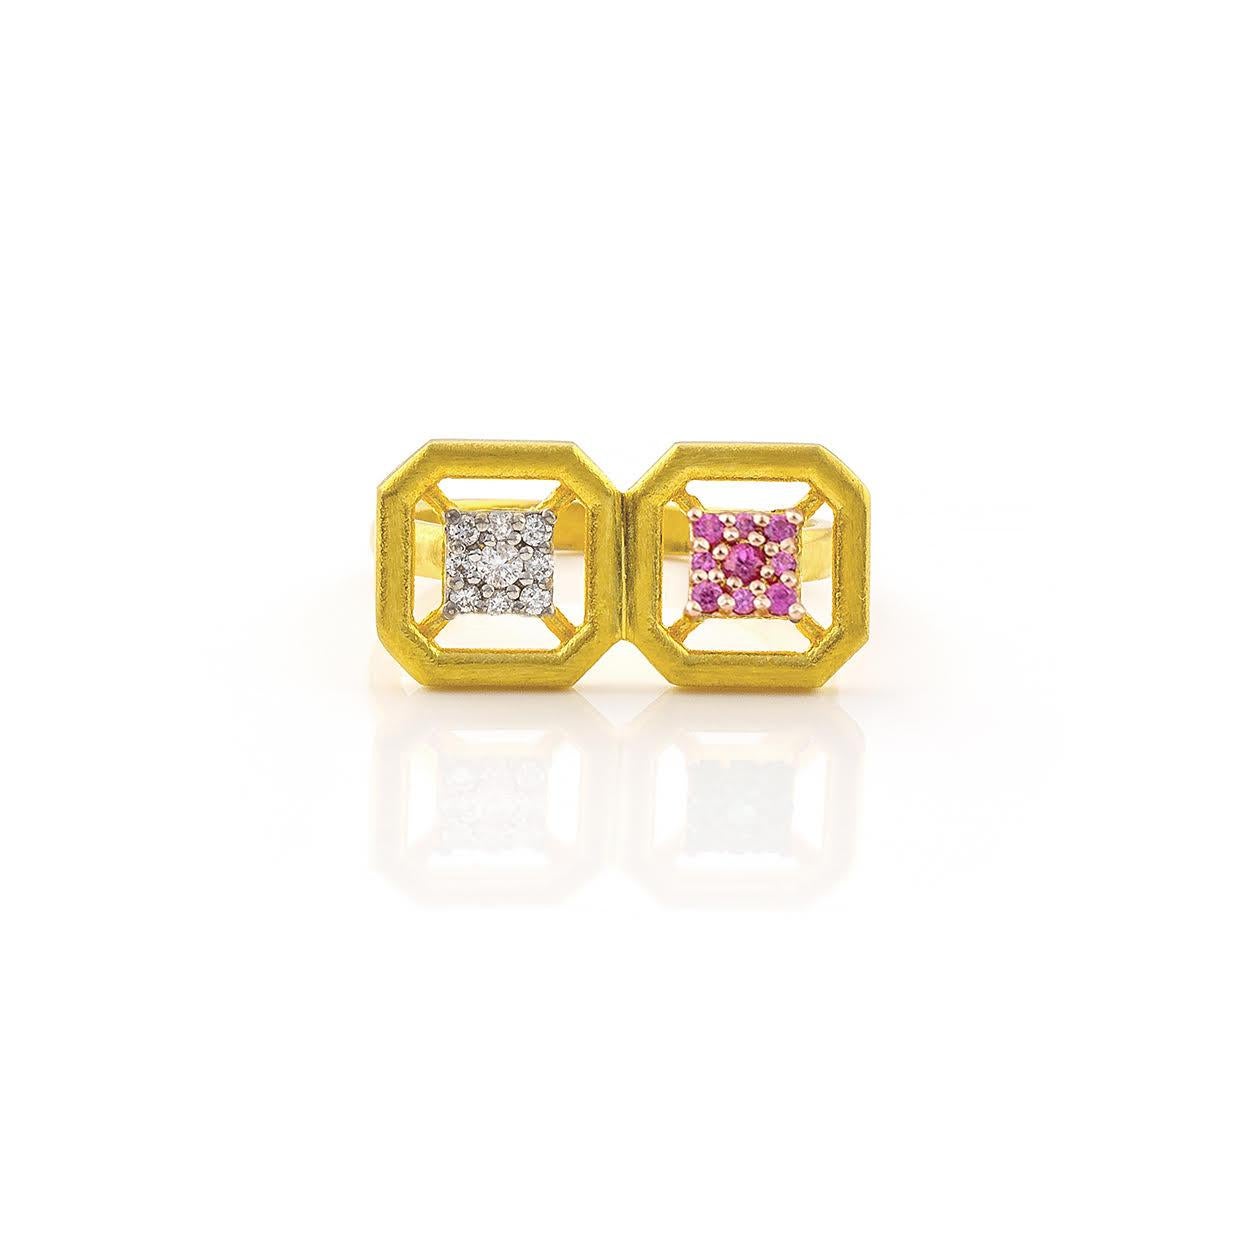 100% recycled 14K Yellow Gold, plated with 22K Gold

Diamond

Pink Sapphire

Size: on order

Ancient Gold Jewelry collection inspired by the antiquity, for young women and men, called Apollonian.

Apollonian is

The beauty of youth
The antiquity
The